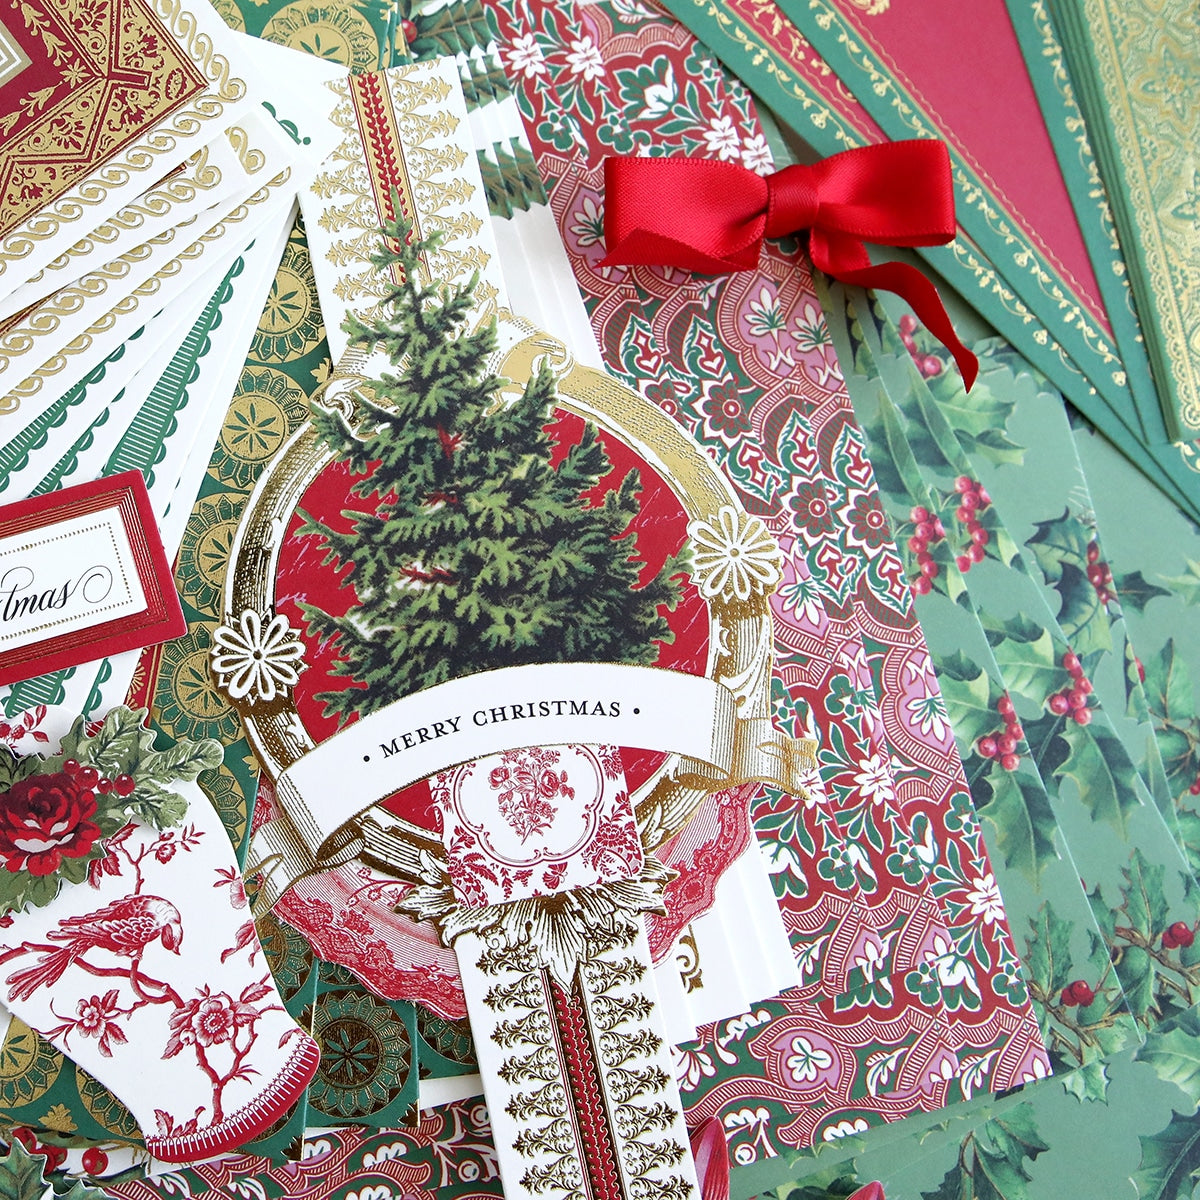 A collection of Christmas Wishes Card Making Kit with red and green ribbons.